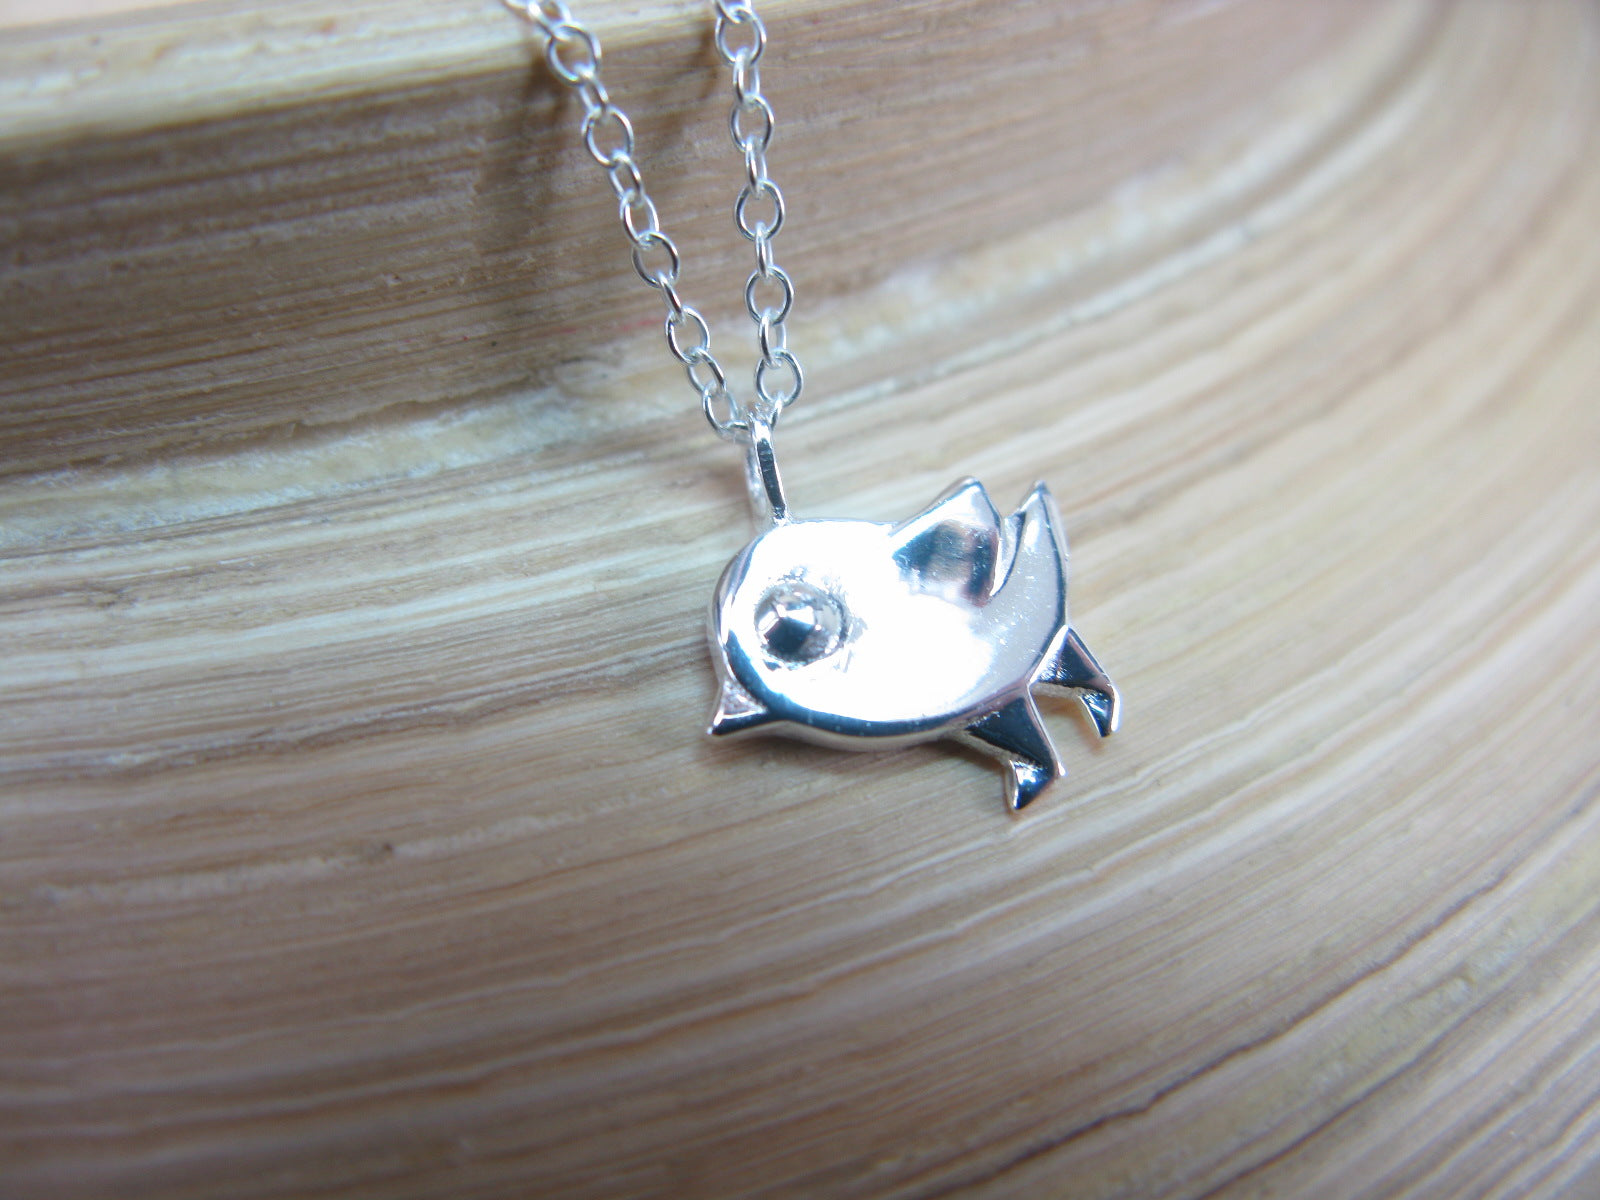 Origami Bird Pendant Chain Necklace in 925 Sterling Silver